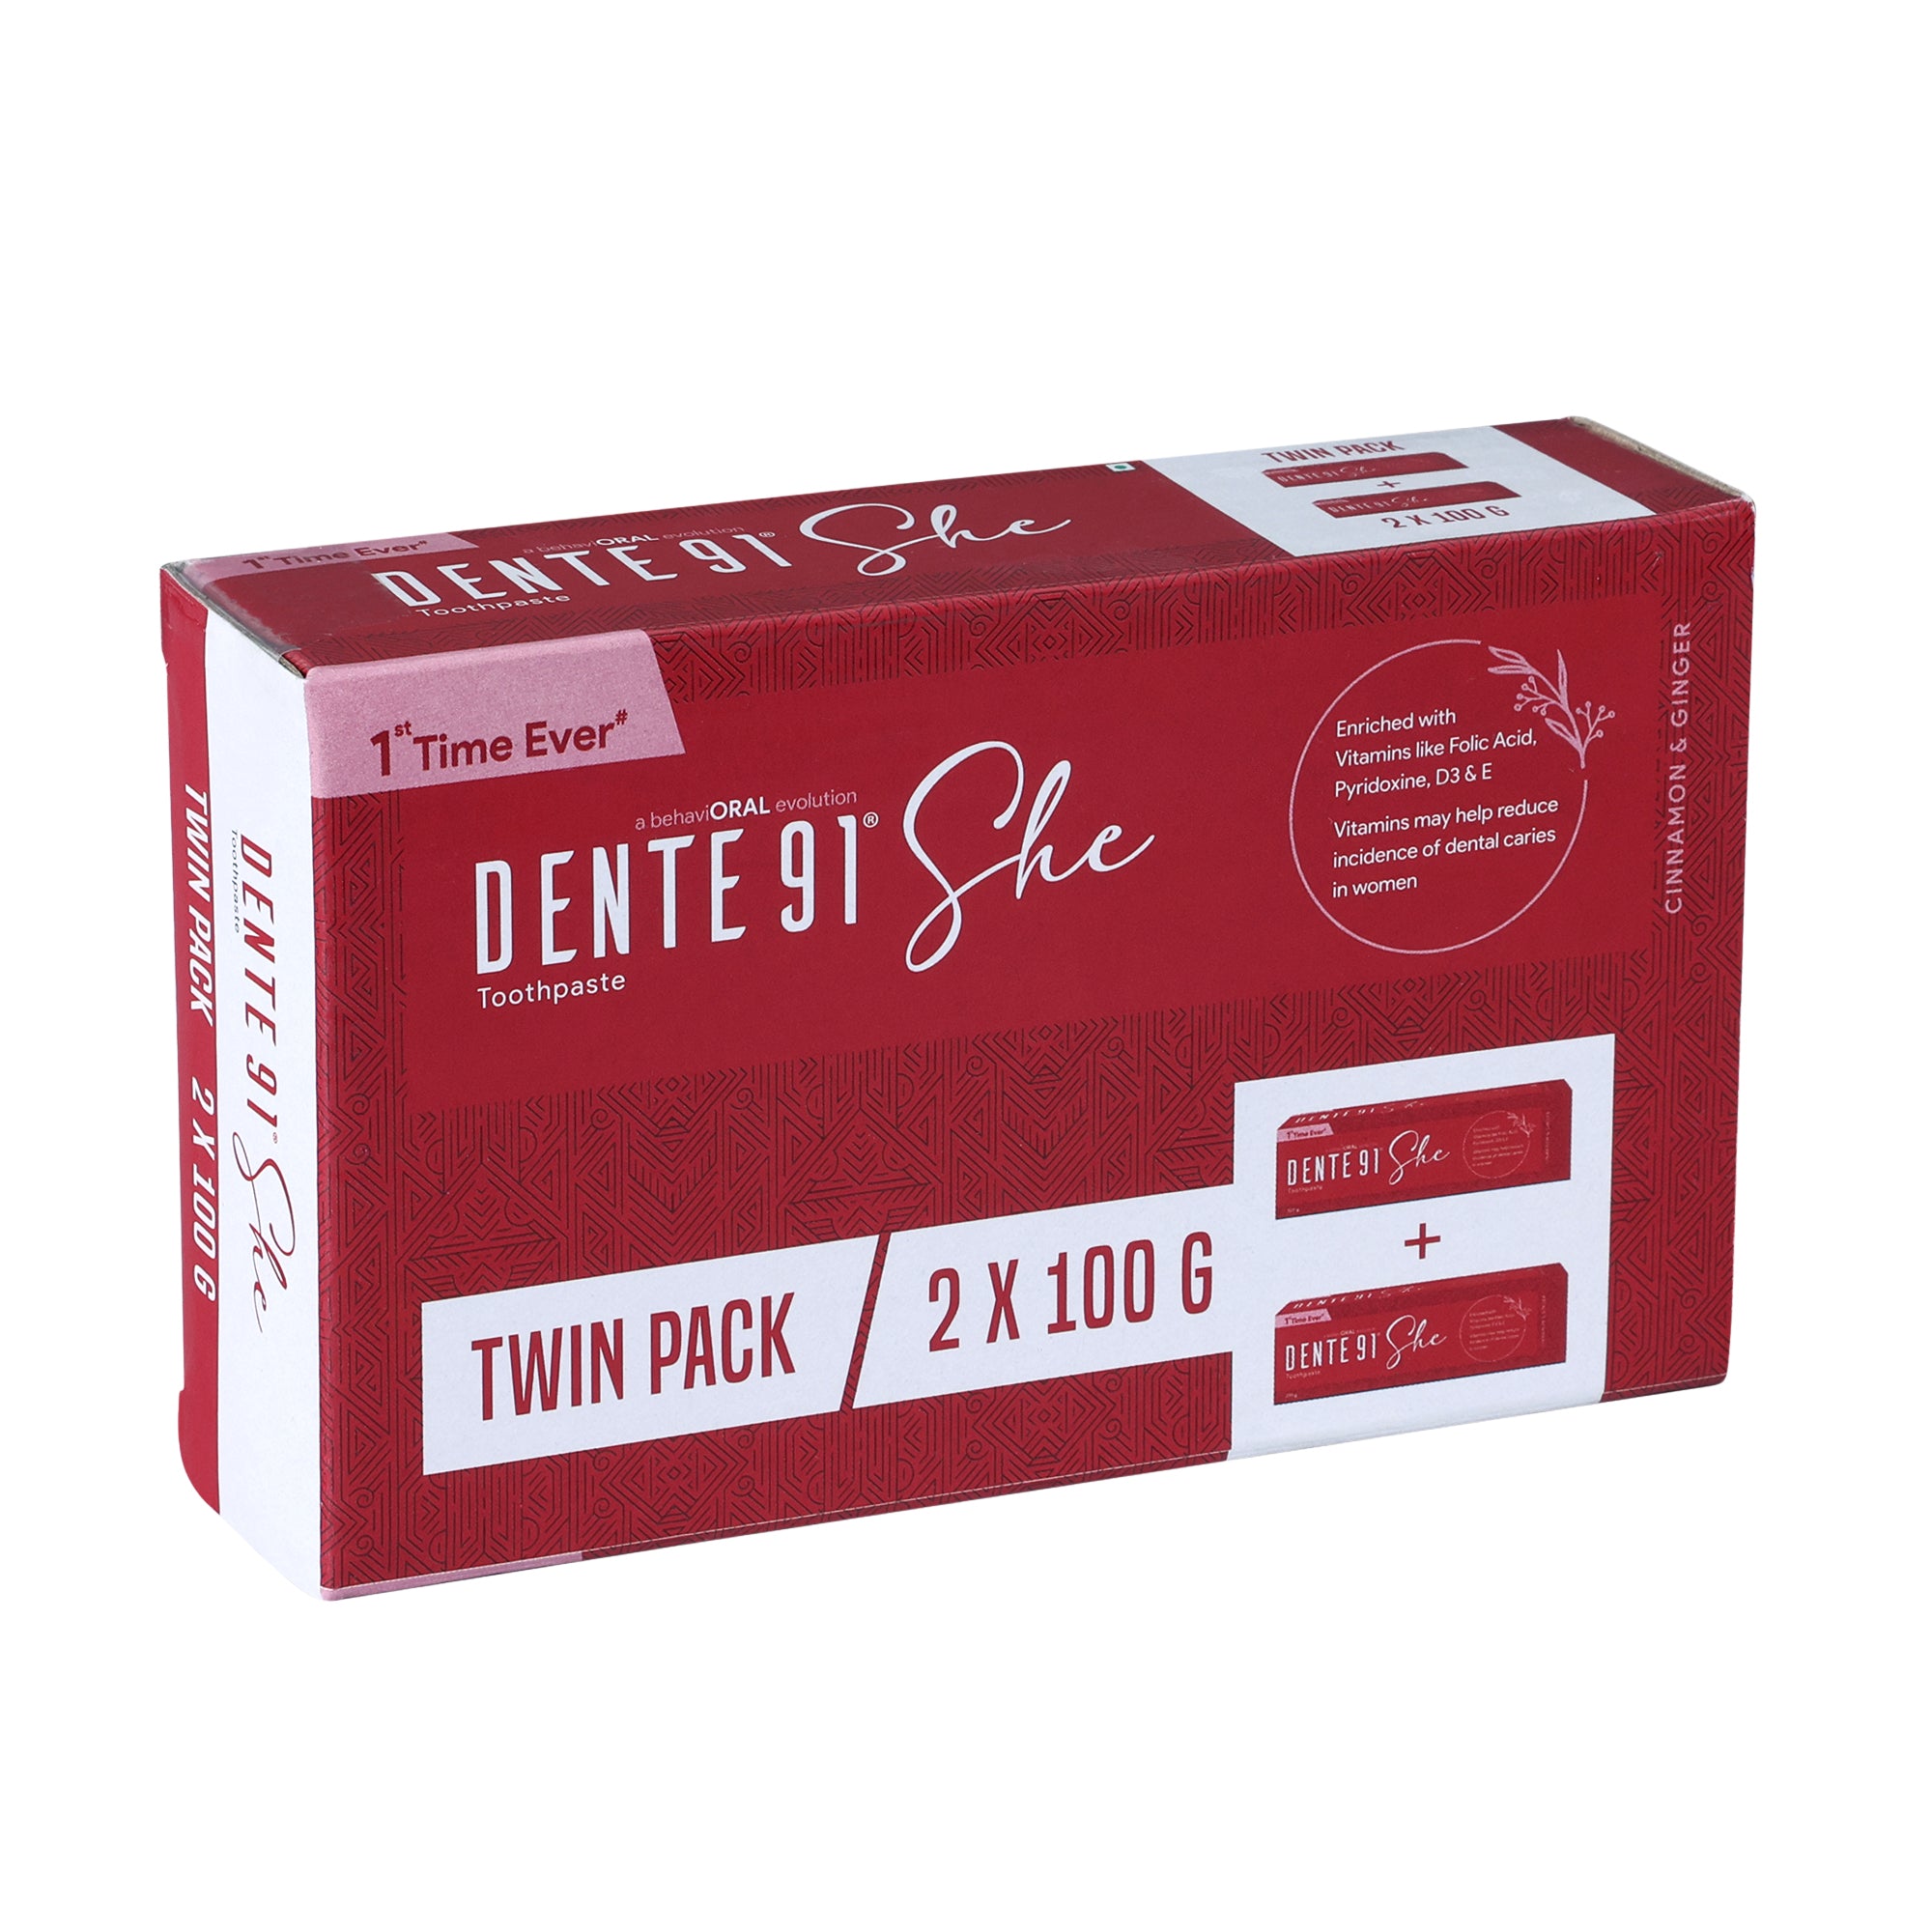 Dente91 SHE Toothpaste Specially Crafted for Women, Contains Folic Acid & Vitamins (B6, E, D3), Cinnamon & Ginger Flavour, Free from SLS, Fluoride & Paraben 100g (Pack of 2)